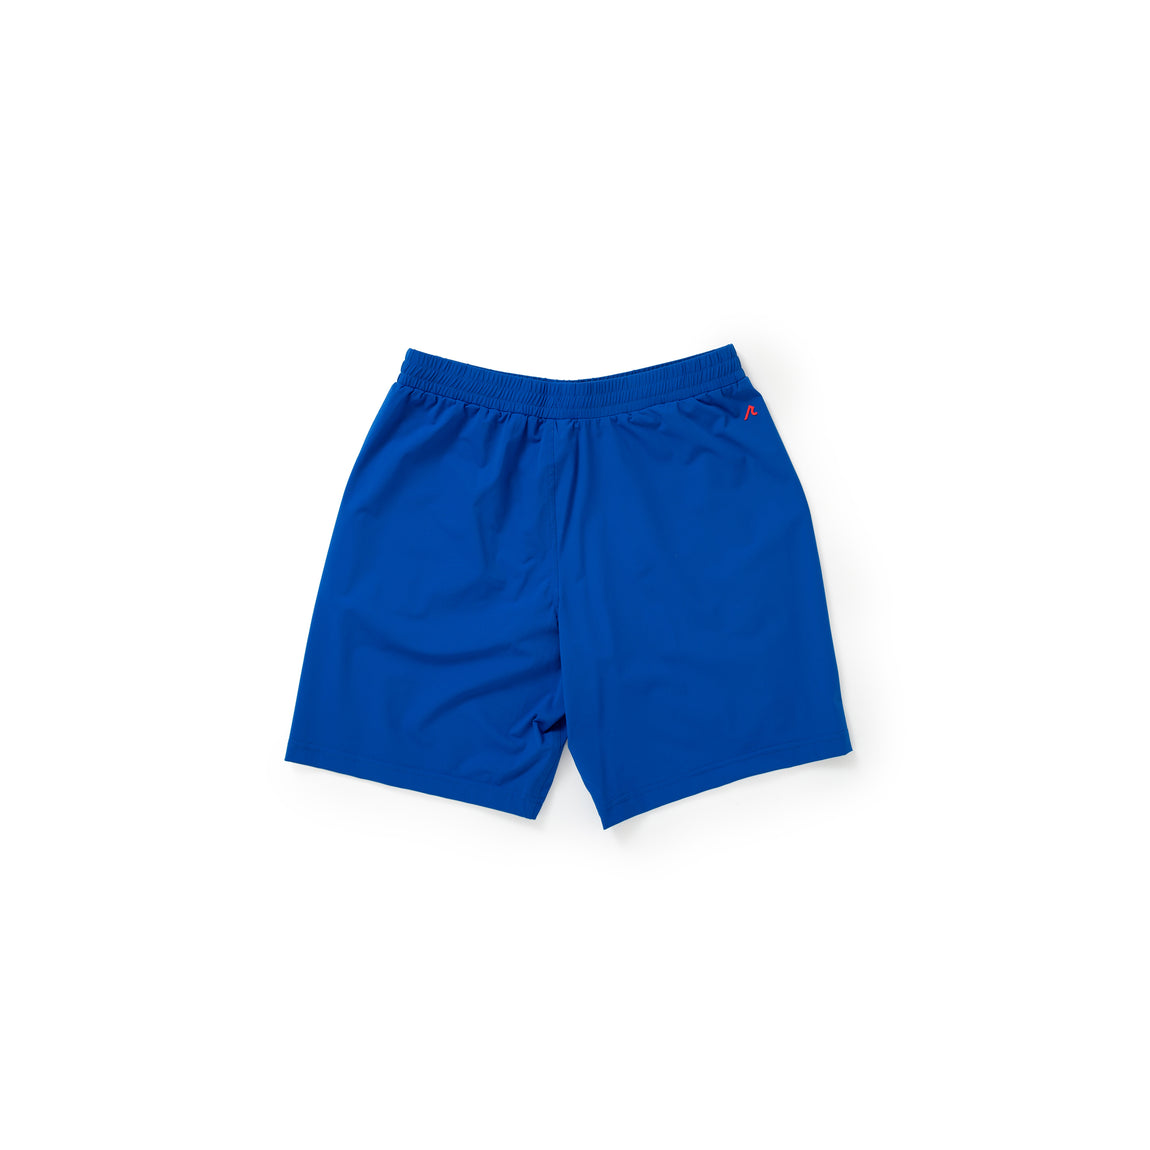 Centre X REDVANLY Parnell Tennis Short (Olympic Blue)